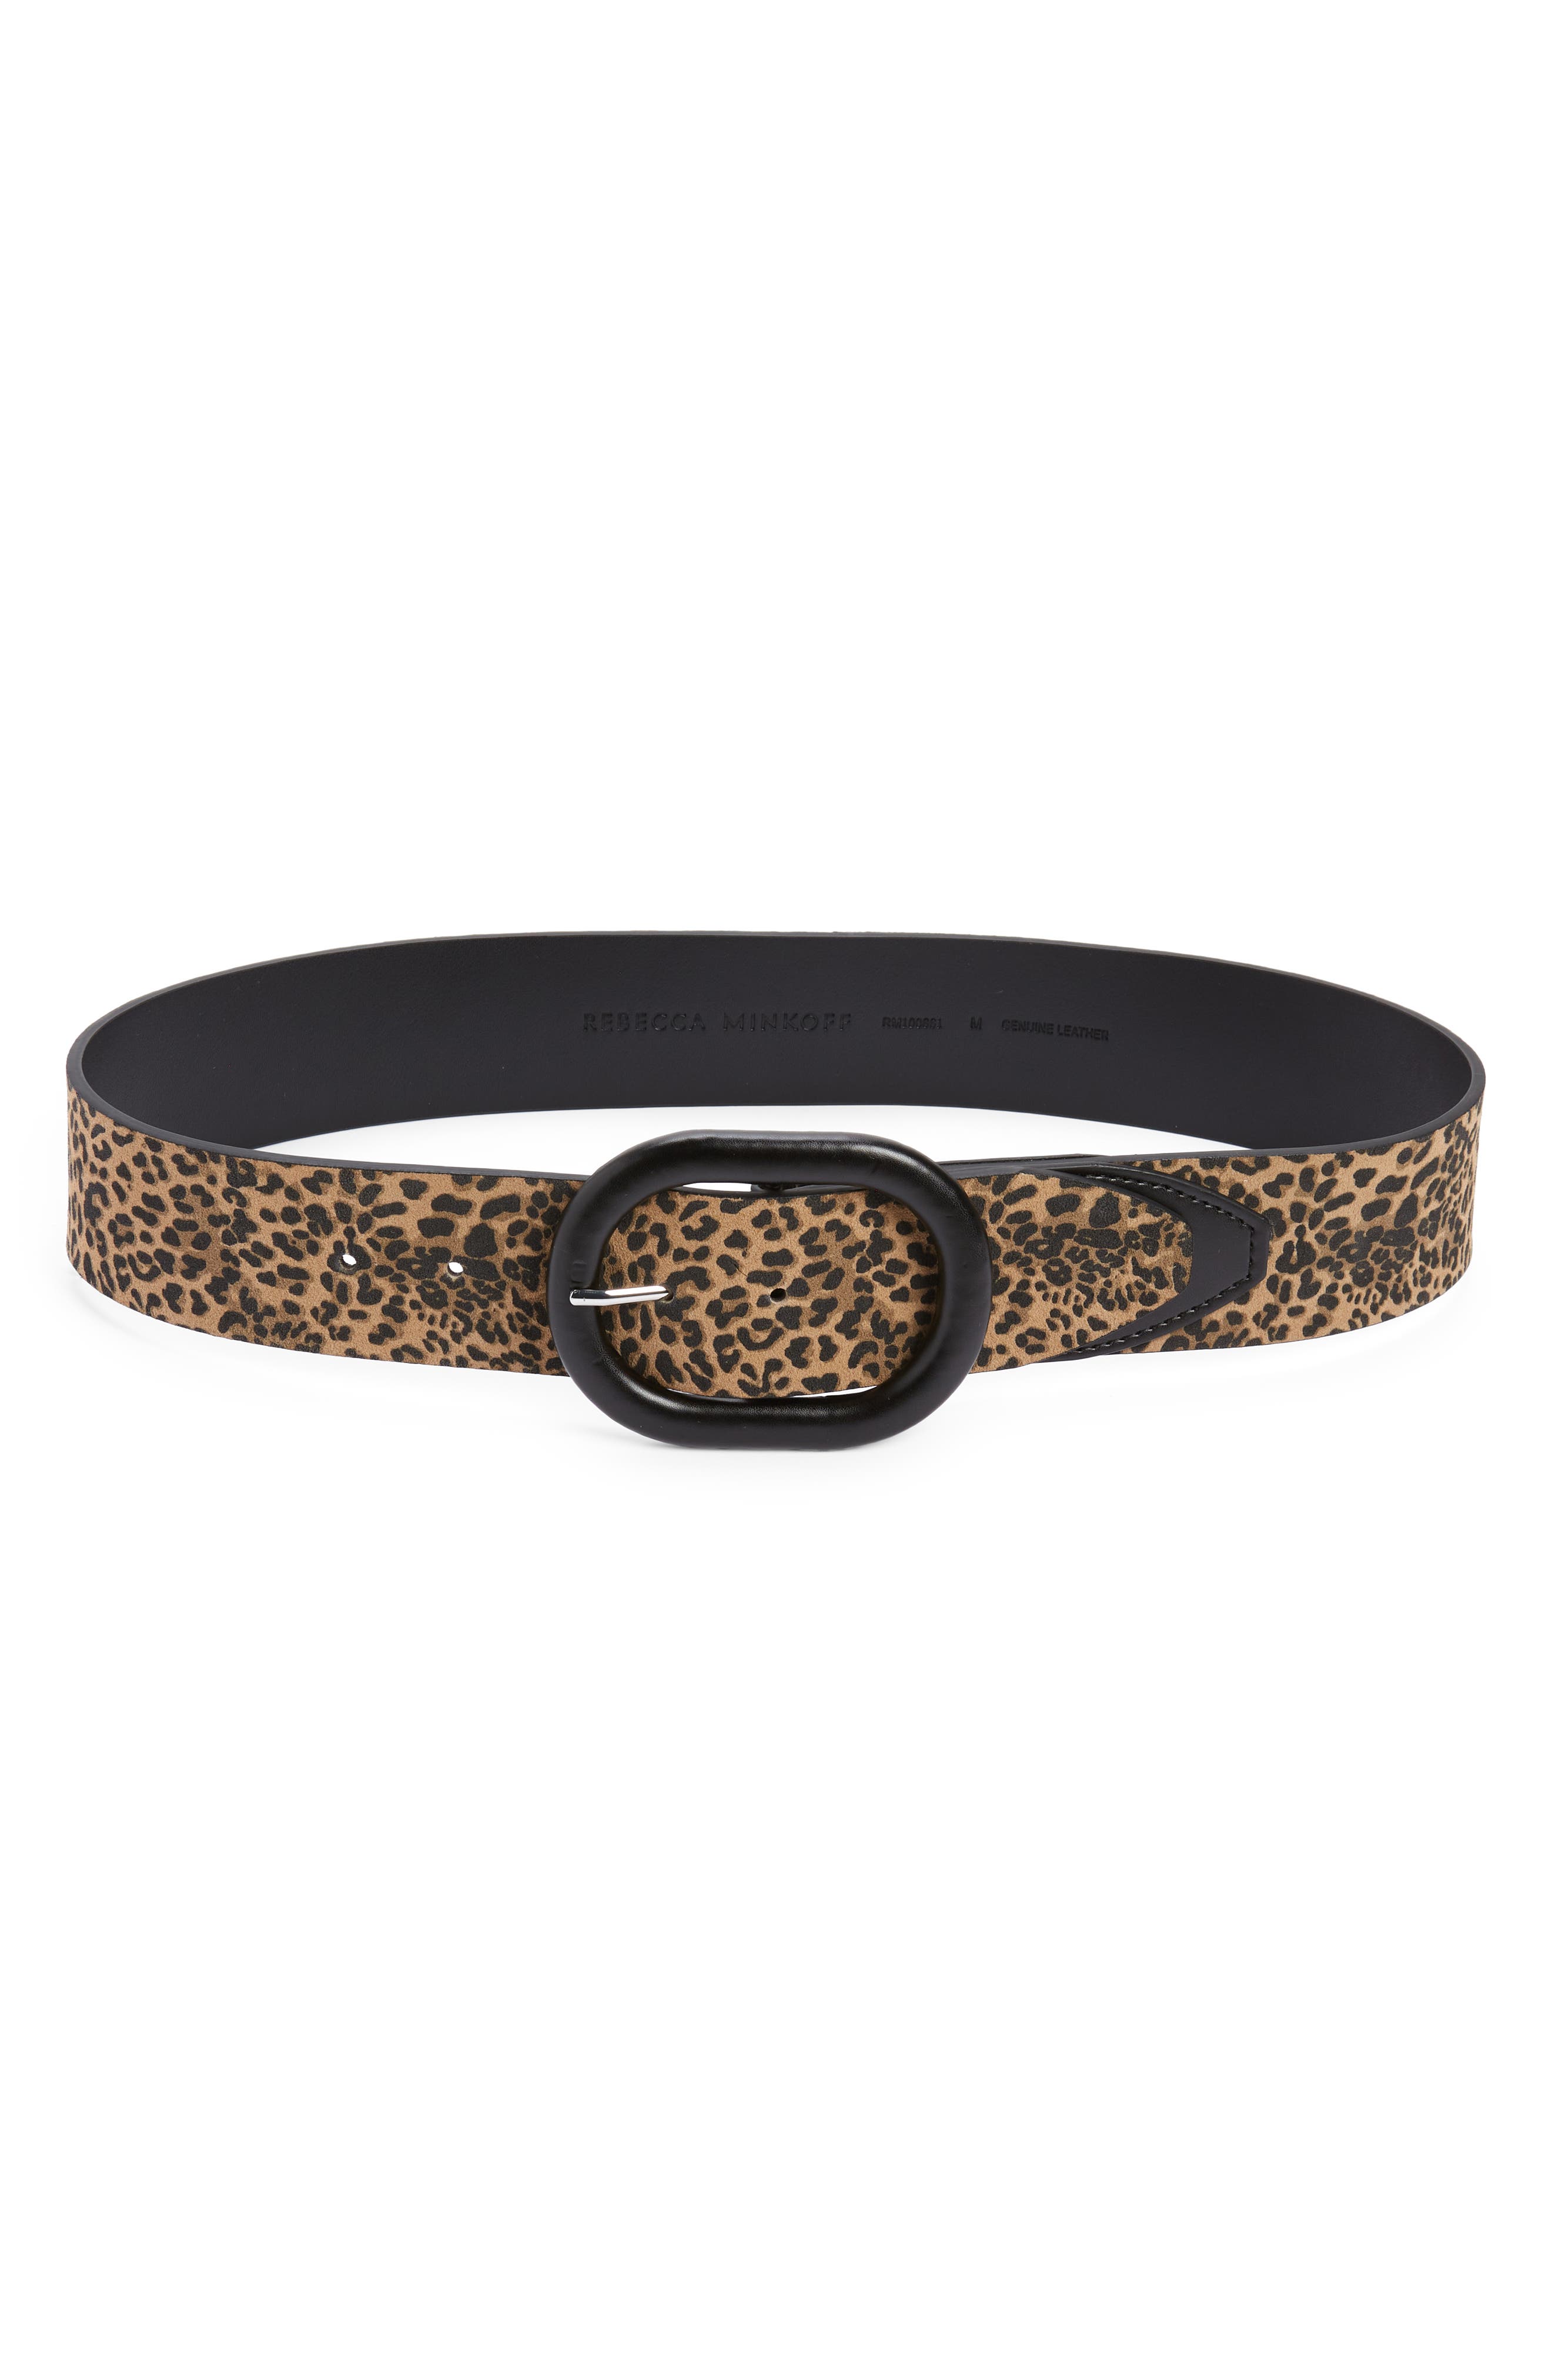 Rebecca Minkoff Micro Cheetah Print Leather Belt at Nordstrom, Size Large